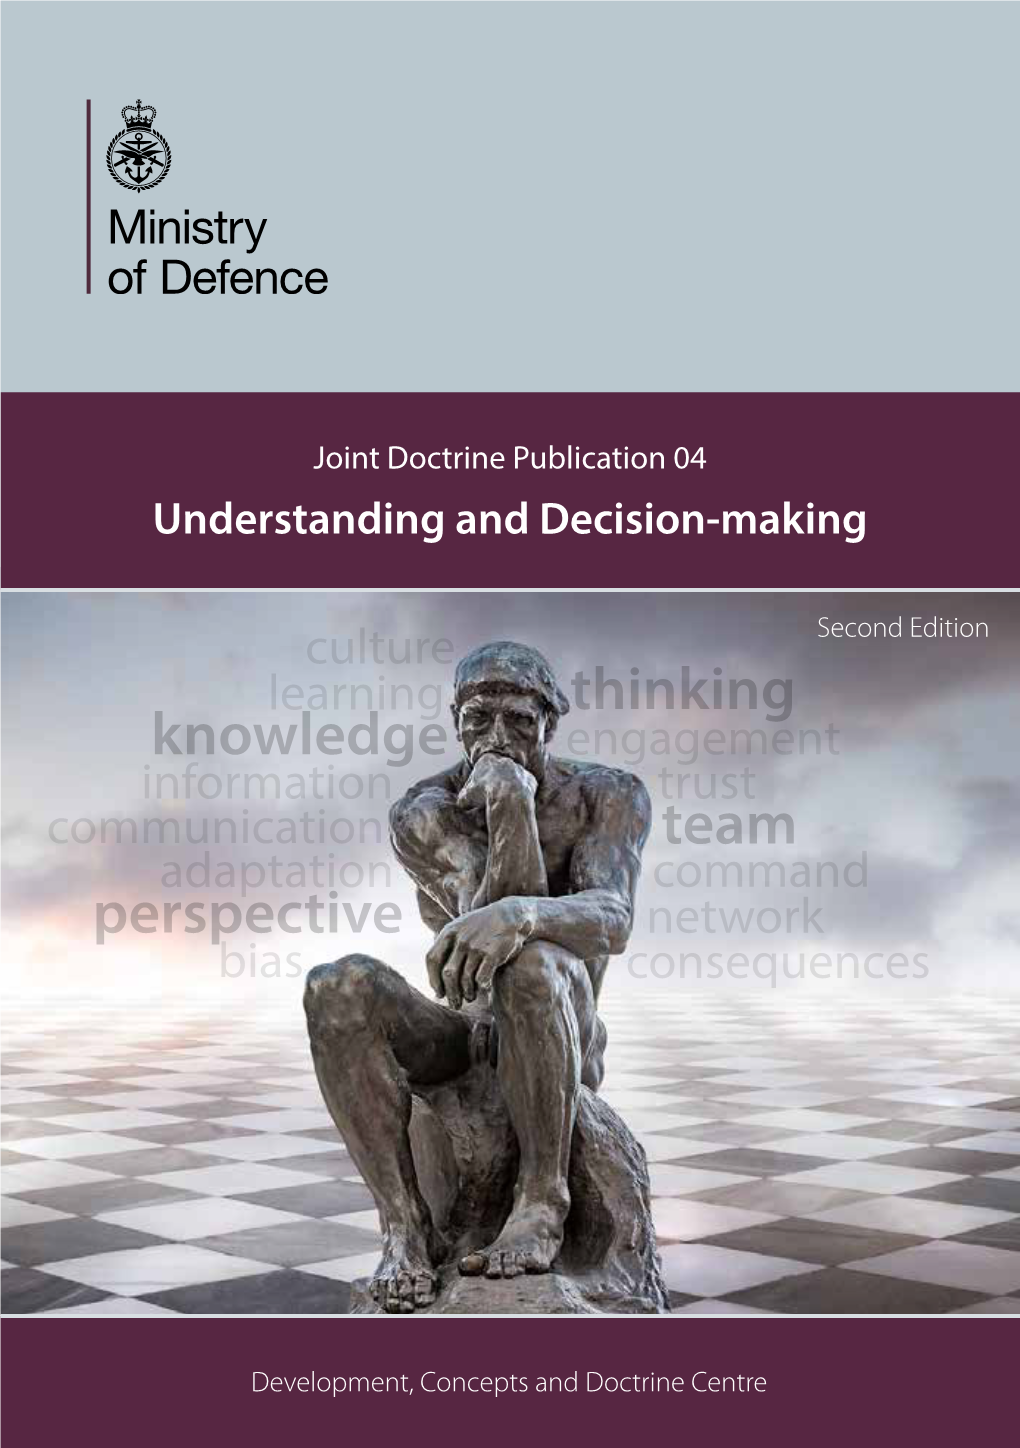 Understanding and Decision-Making (JDP 04 Second Edition)